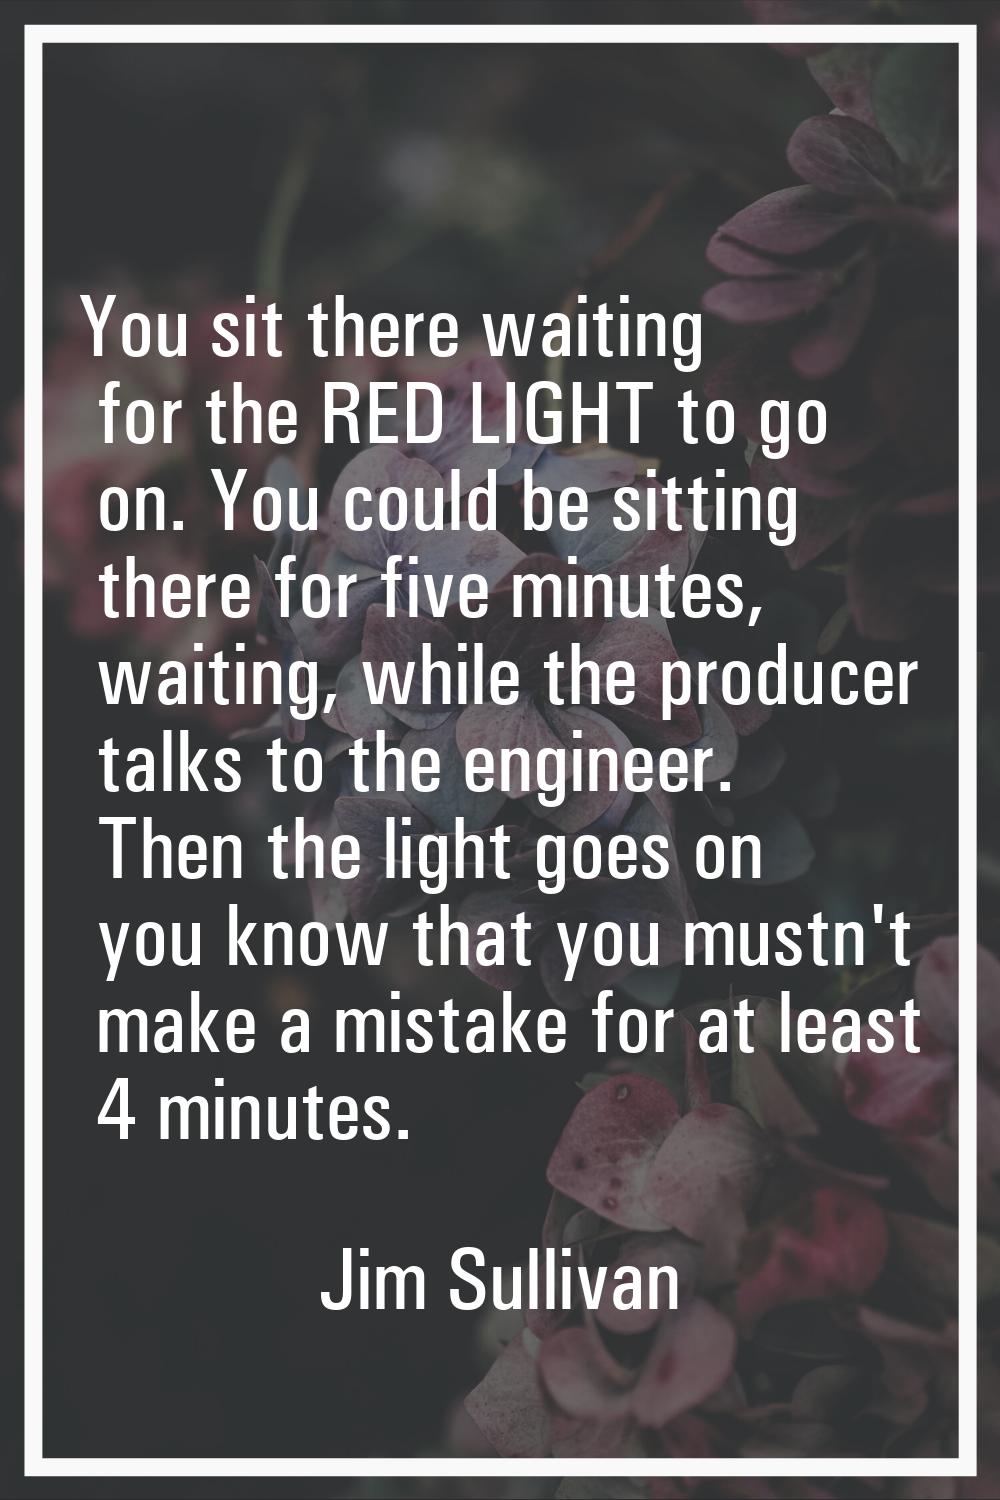 You sit there waiting for the RED LIGHT to go on. You could be sitting there for five minutes, wait